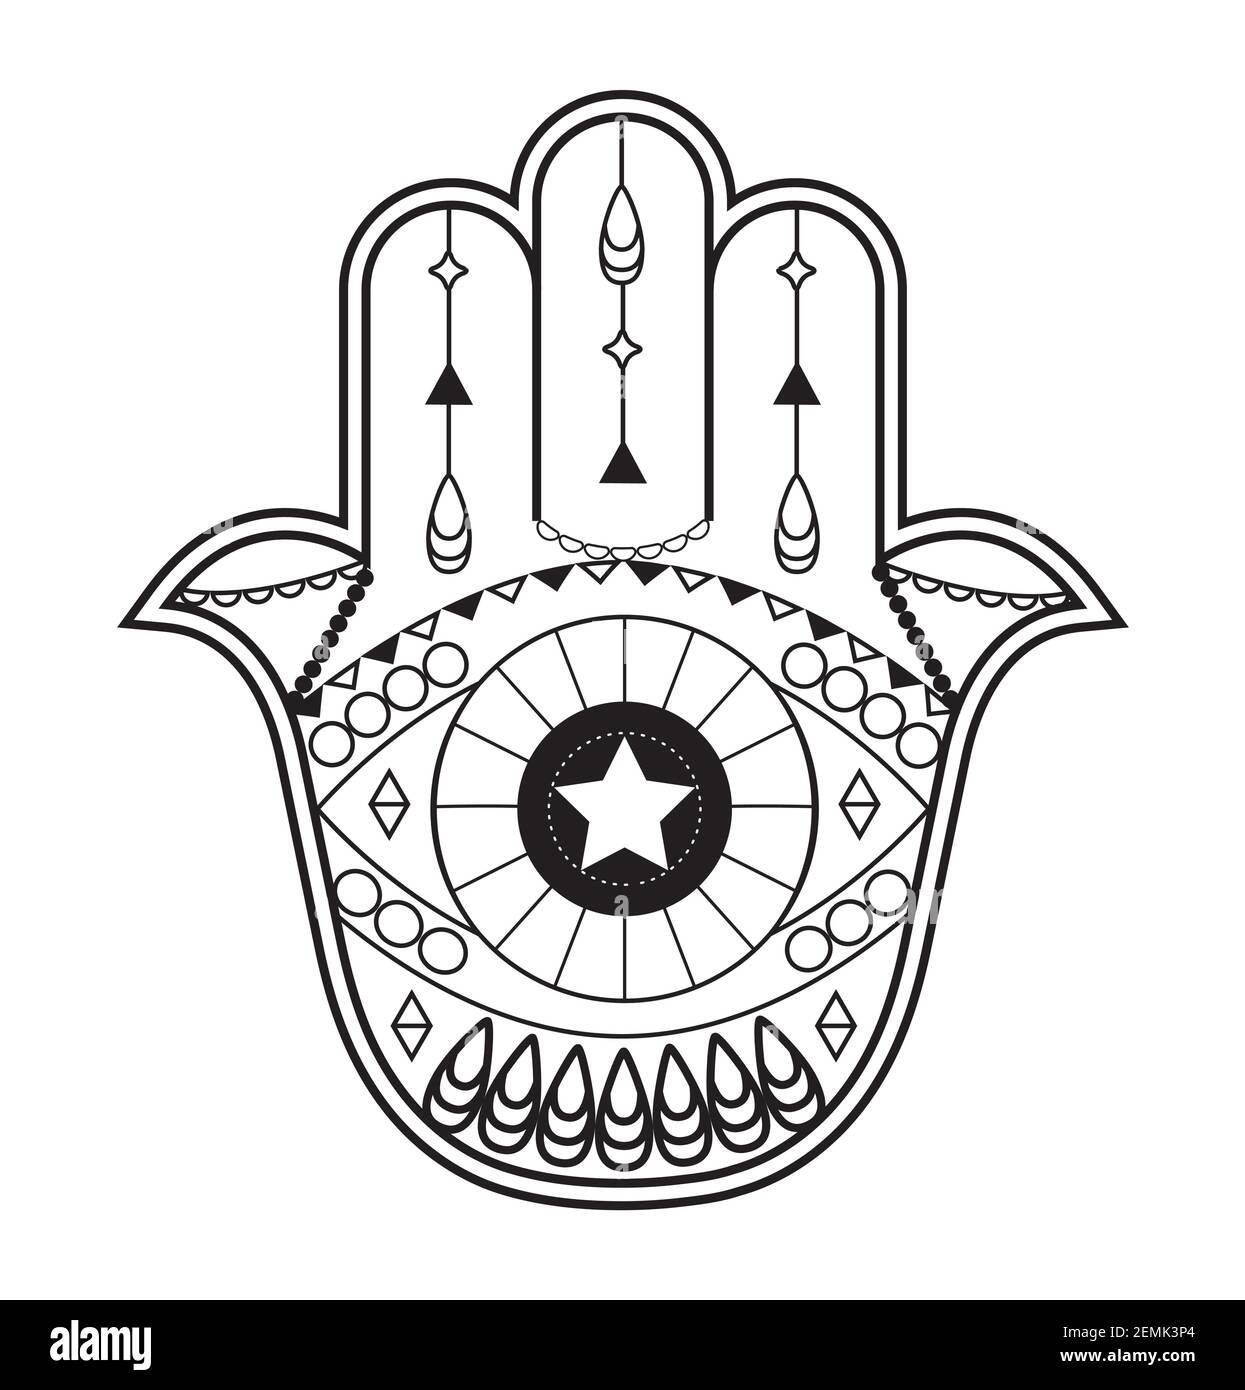 Hamsa Hand Vector with Mystical Esoteric Symbols Like Pyramid Evil Eye  Indian Color Page Tattoo Henna Illustration Stock Vector  Illustration  of geometry luck 211472513